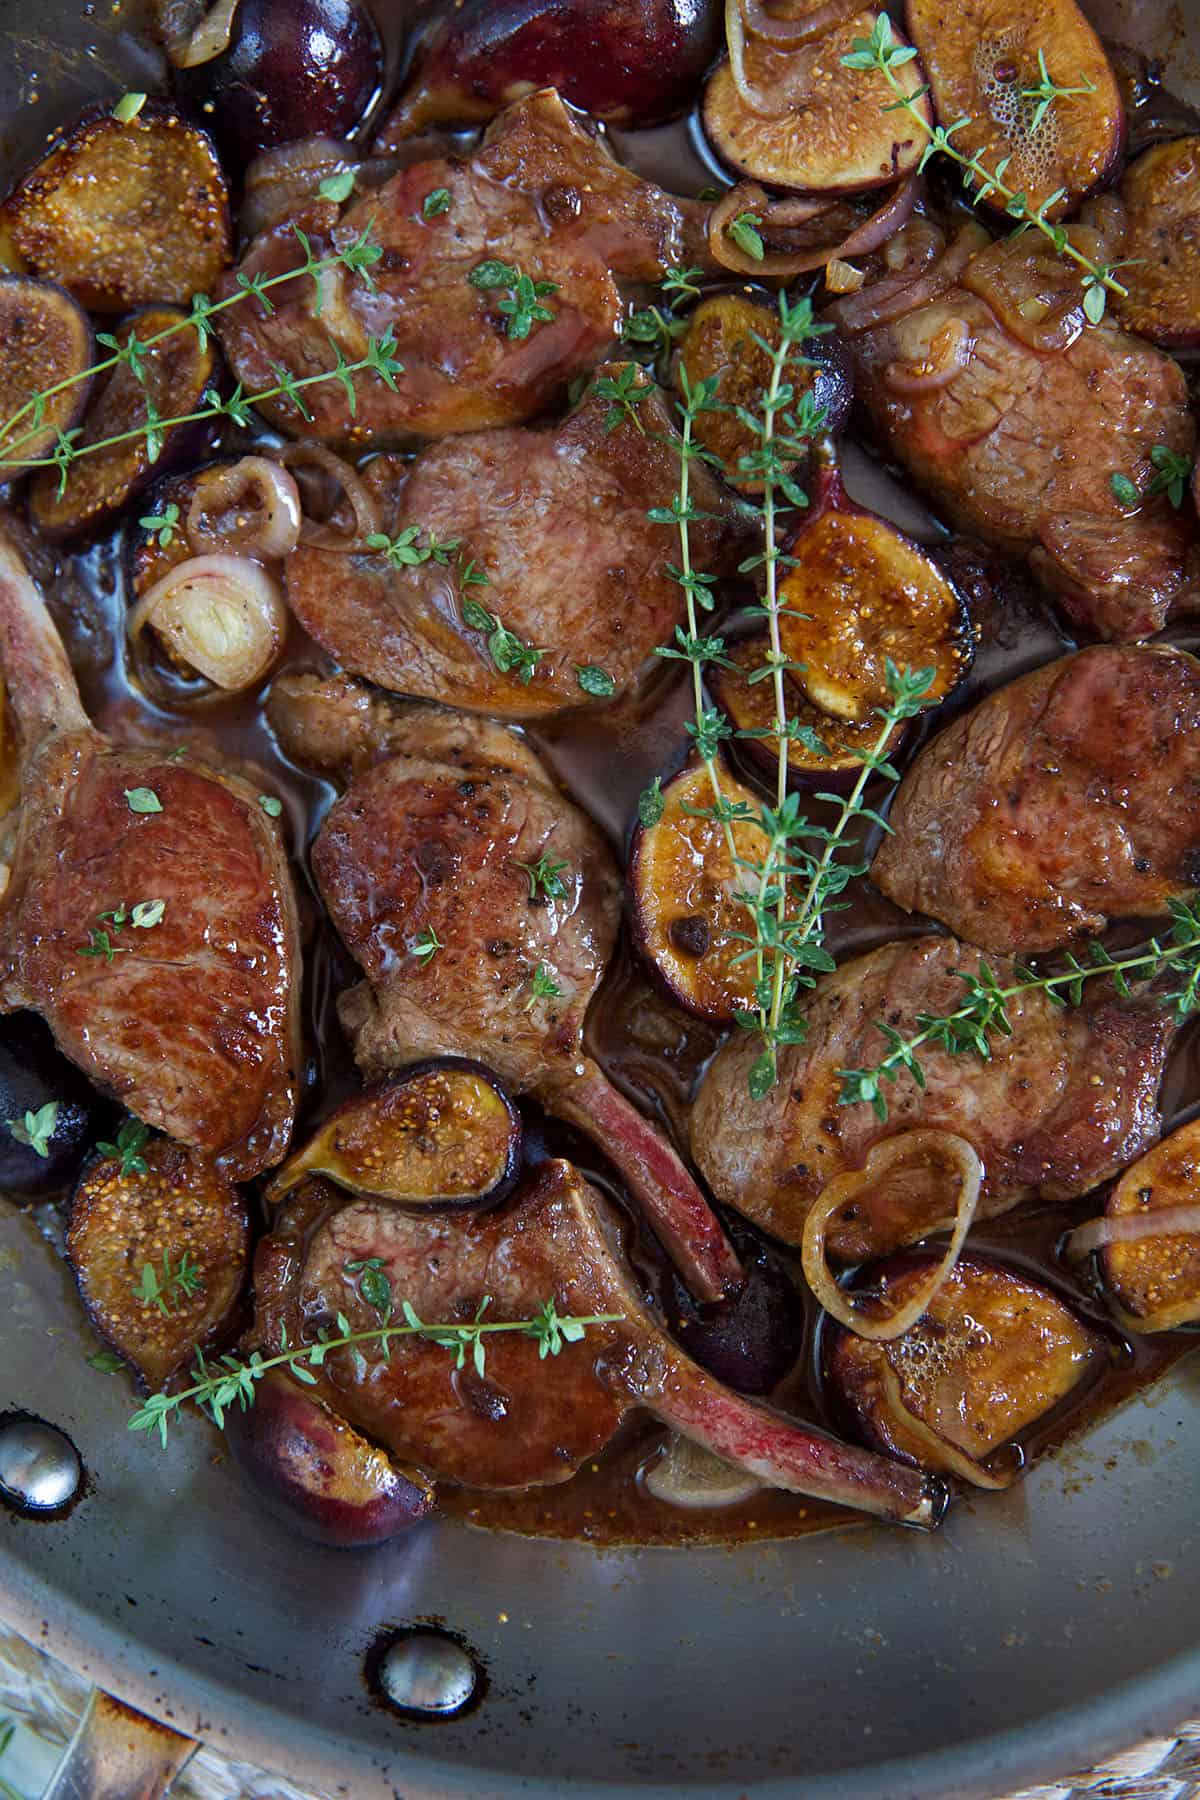 Fully cooked meat, figs, and fresh herbs are in a saucy pan.